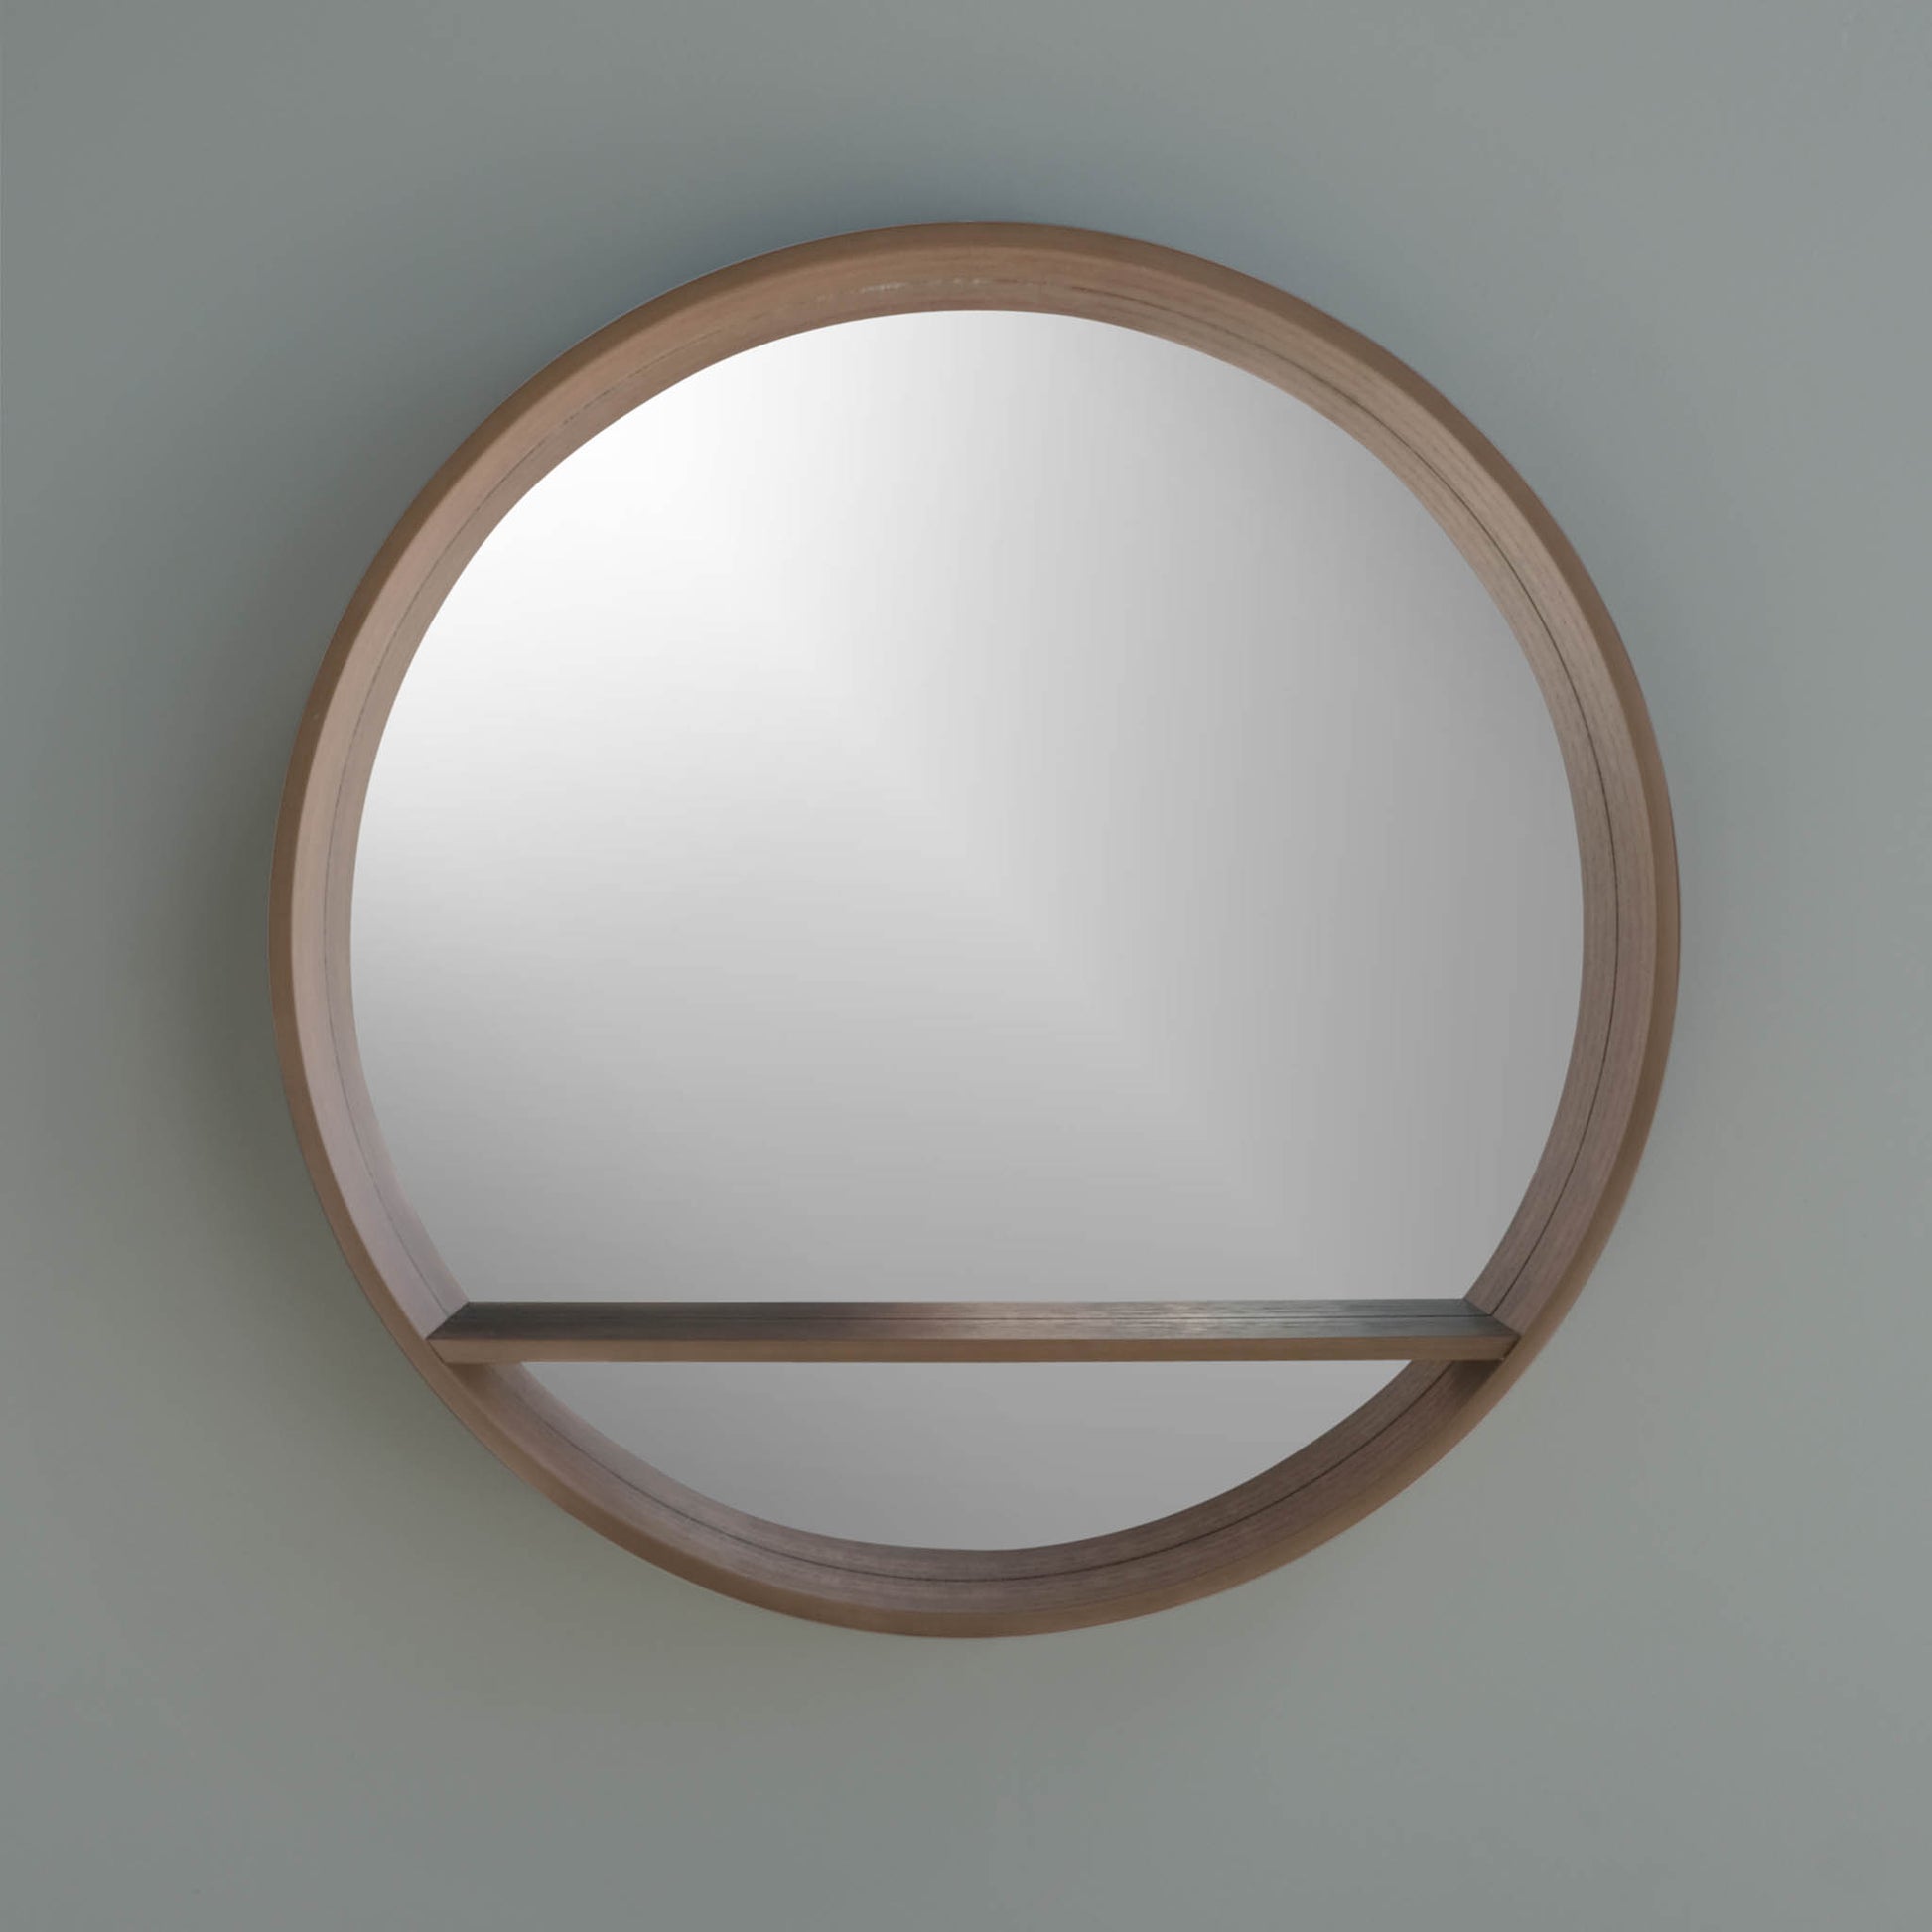 pear round mirror with a shelf, thick frame hanging on a wall